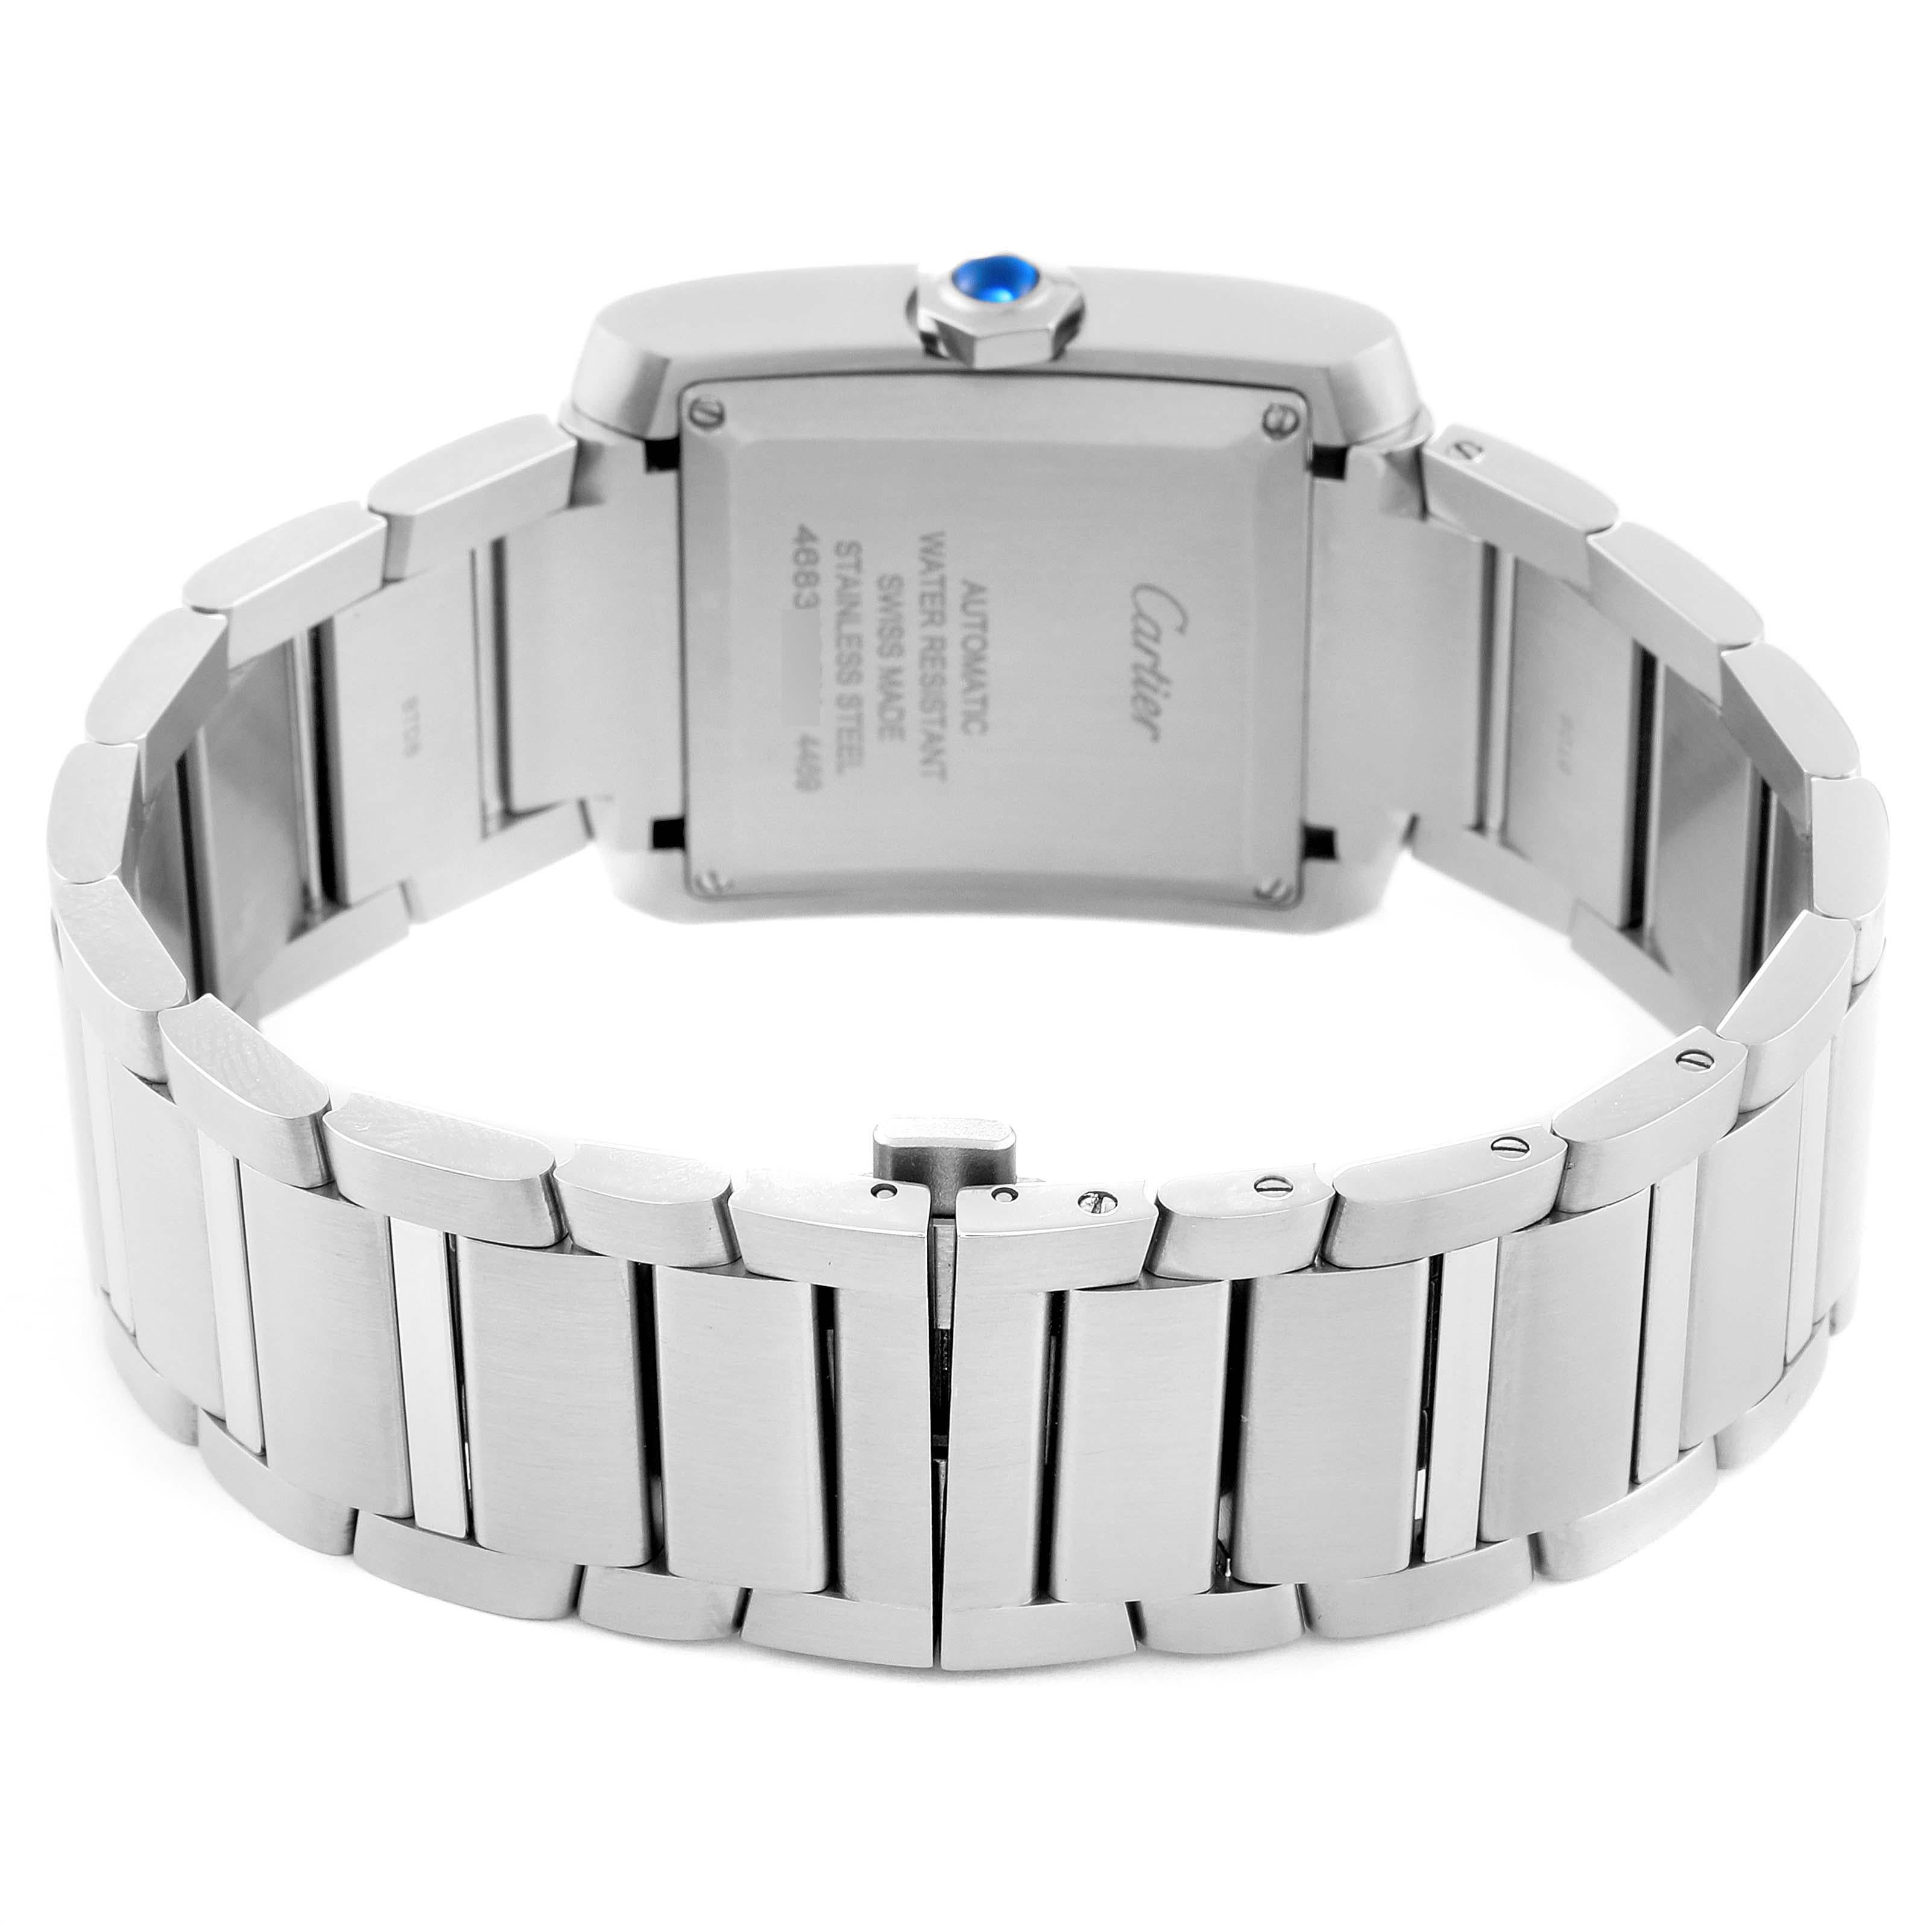 Cartier Tank Francaise Large Automatic Steel Mens Watch WSTA0067 For Sale 3